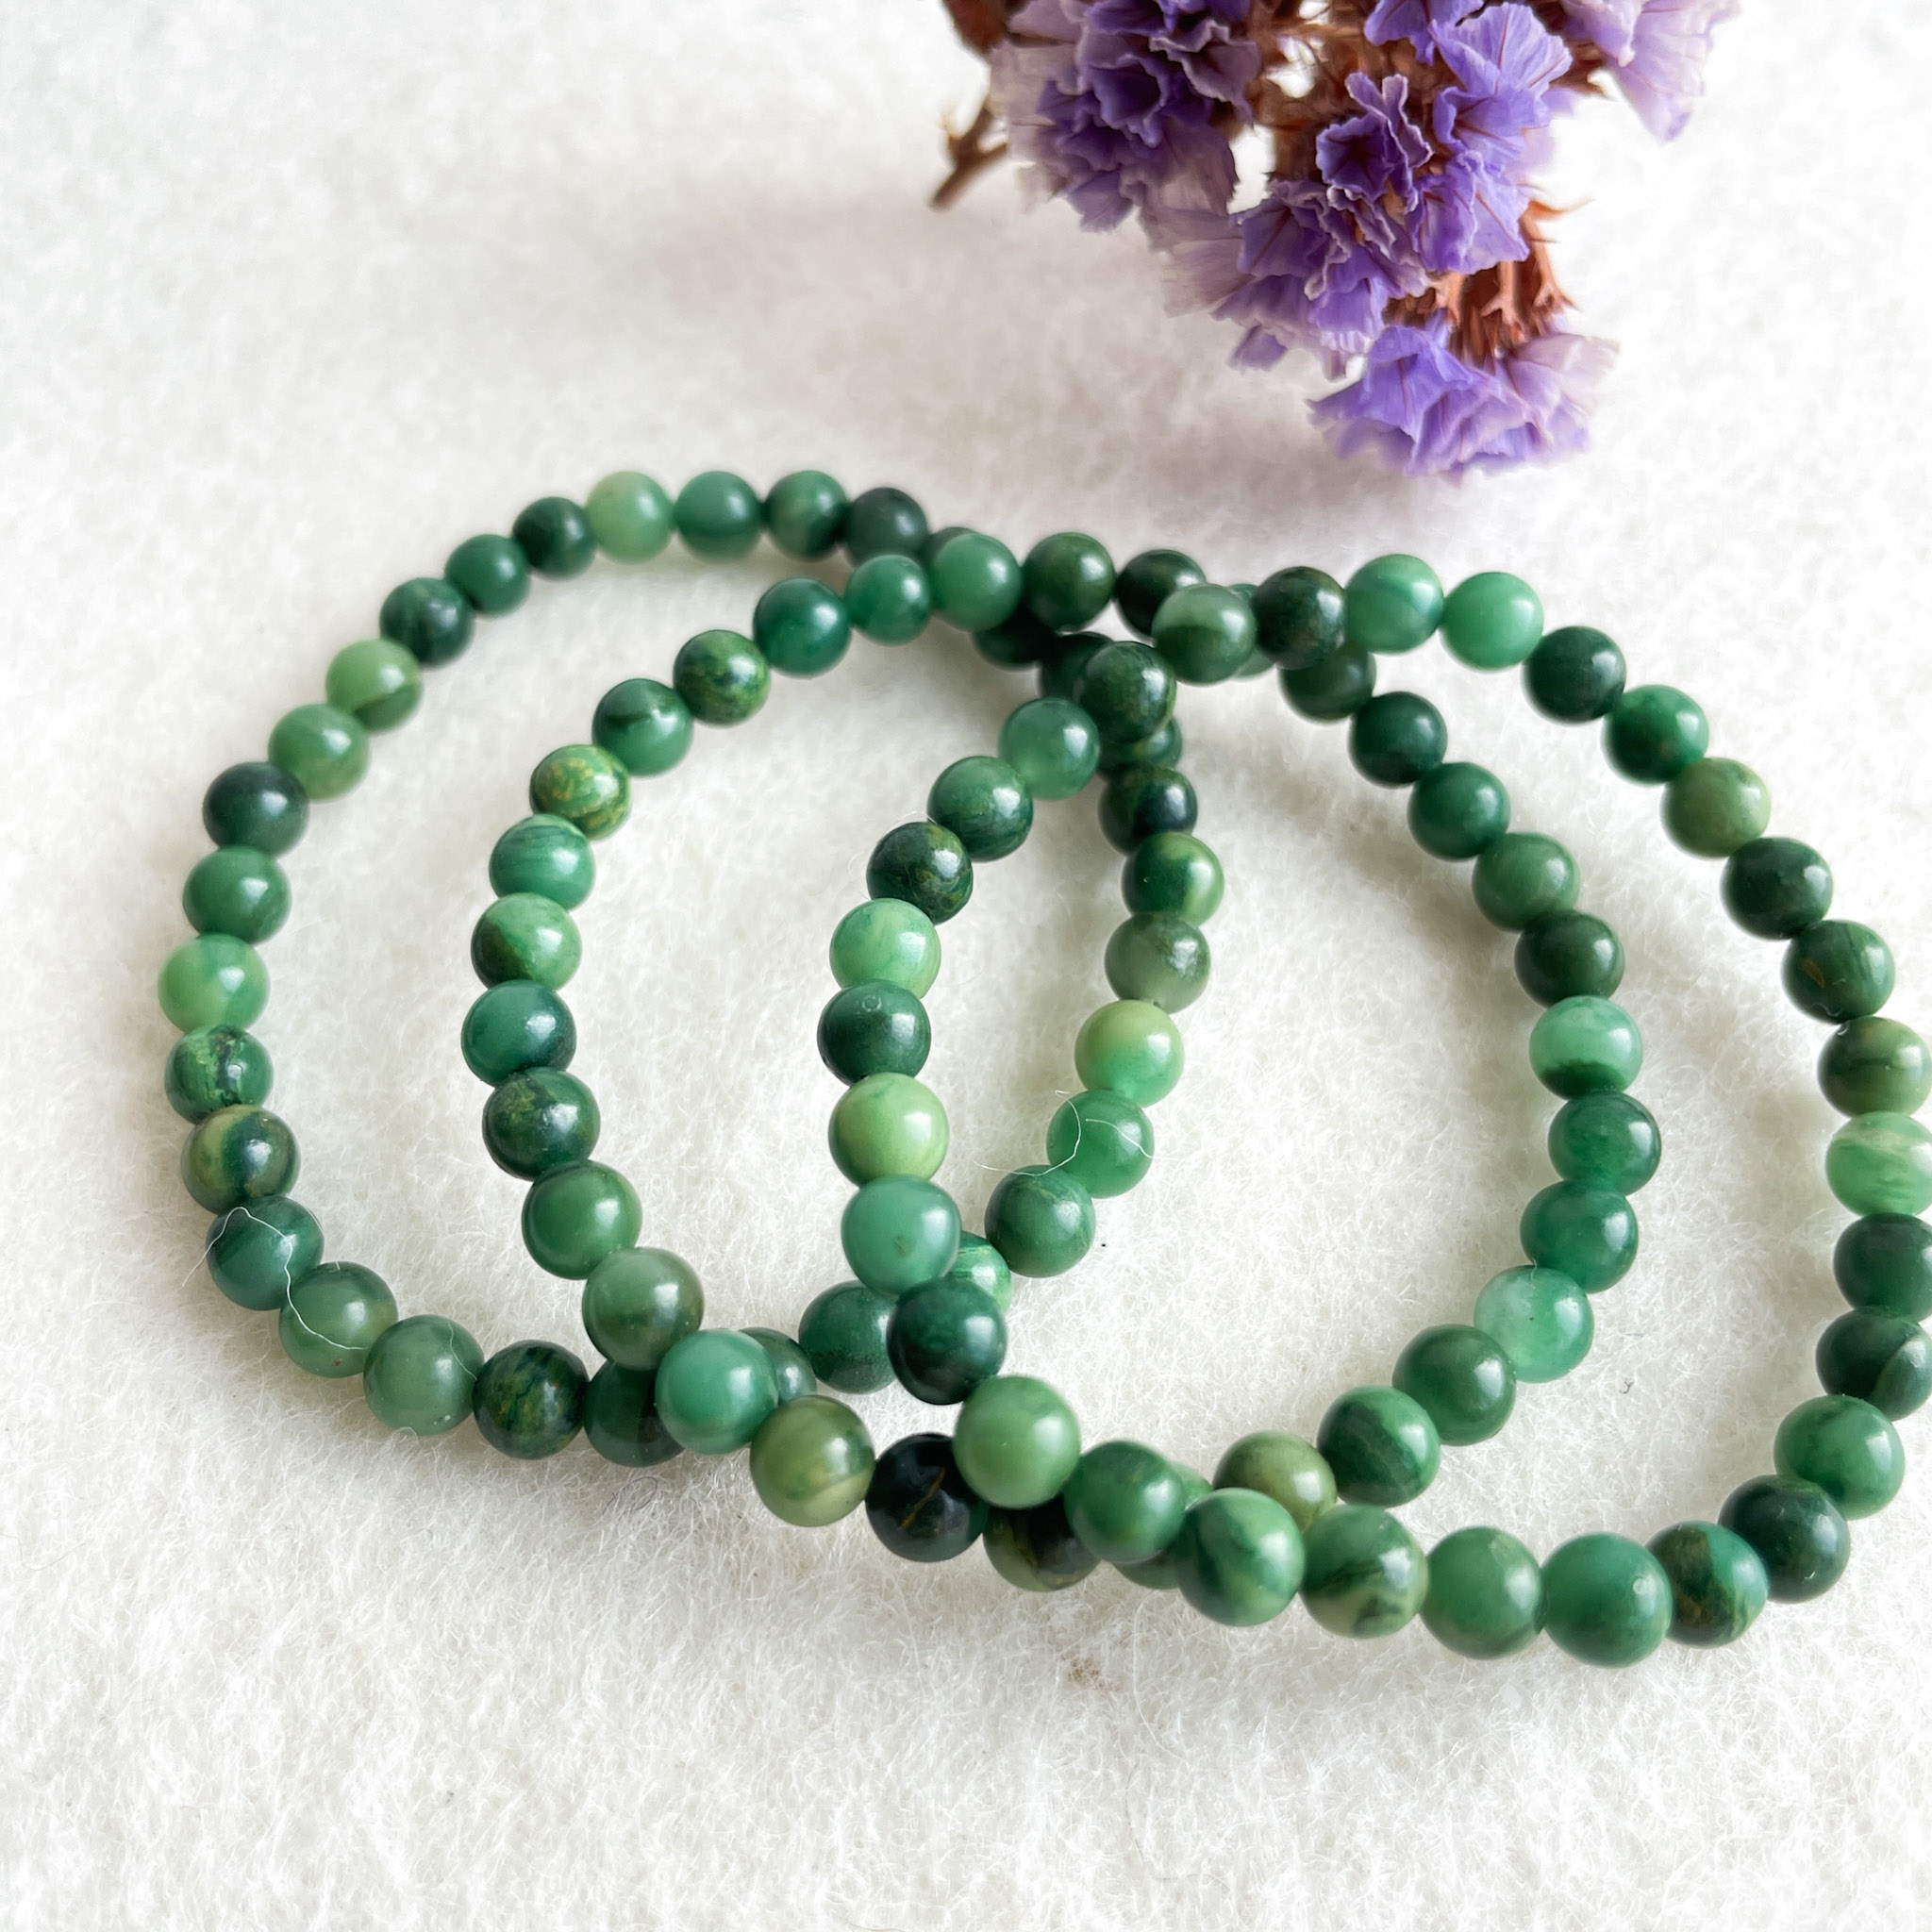 Three strands of green jade beads laid on a white surface with blurred purple flowers in the background.